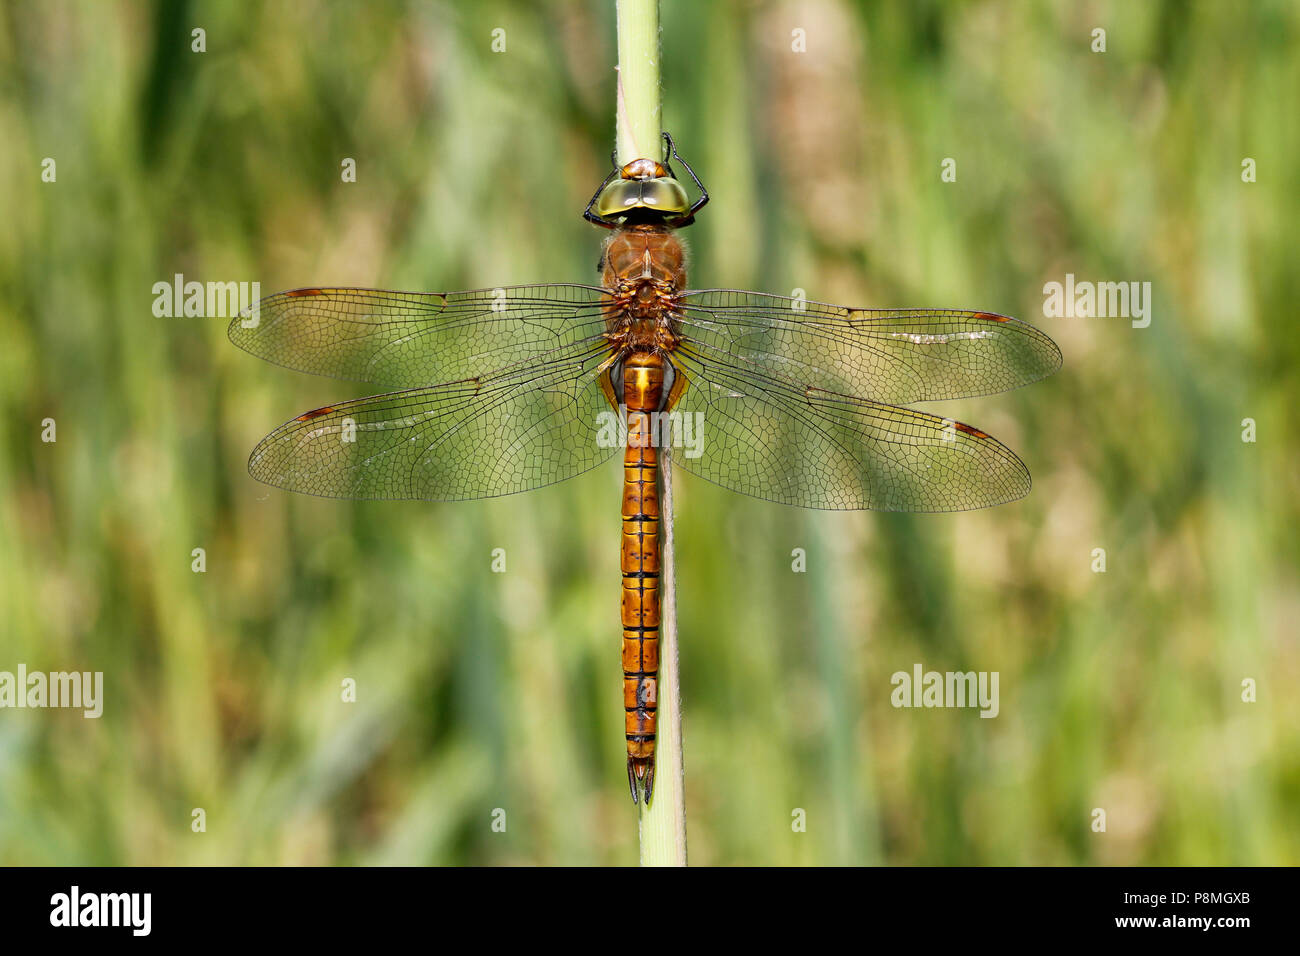 a male green-eyed hawker (Aeshna isoceles) Stock Photo